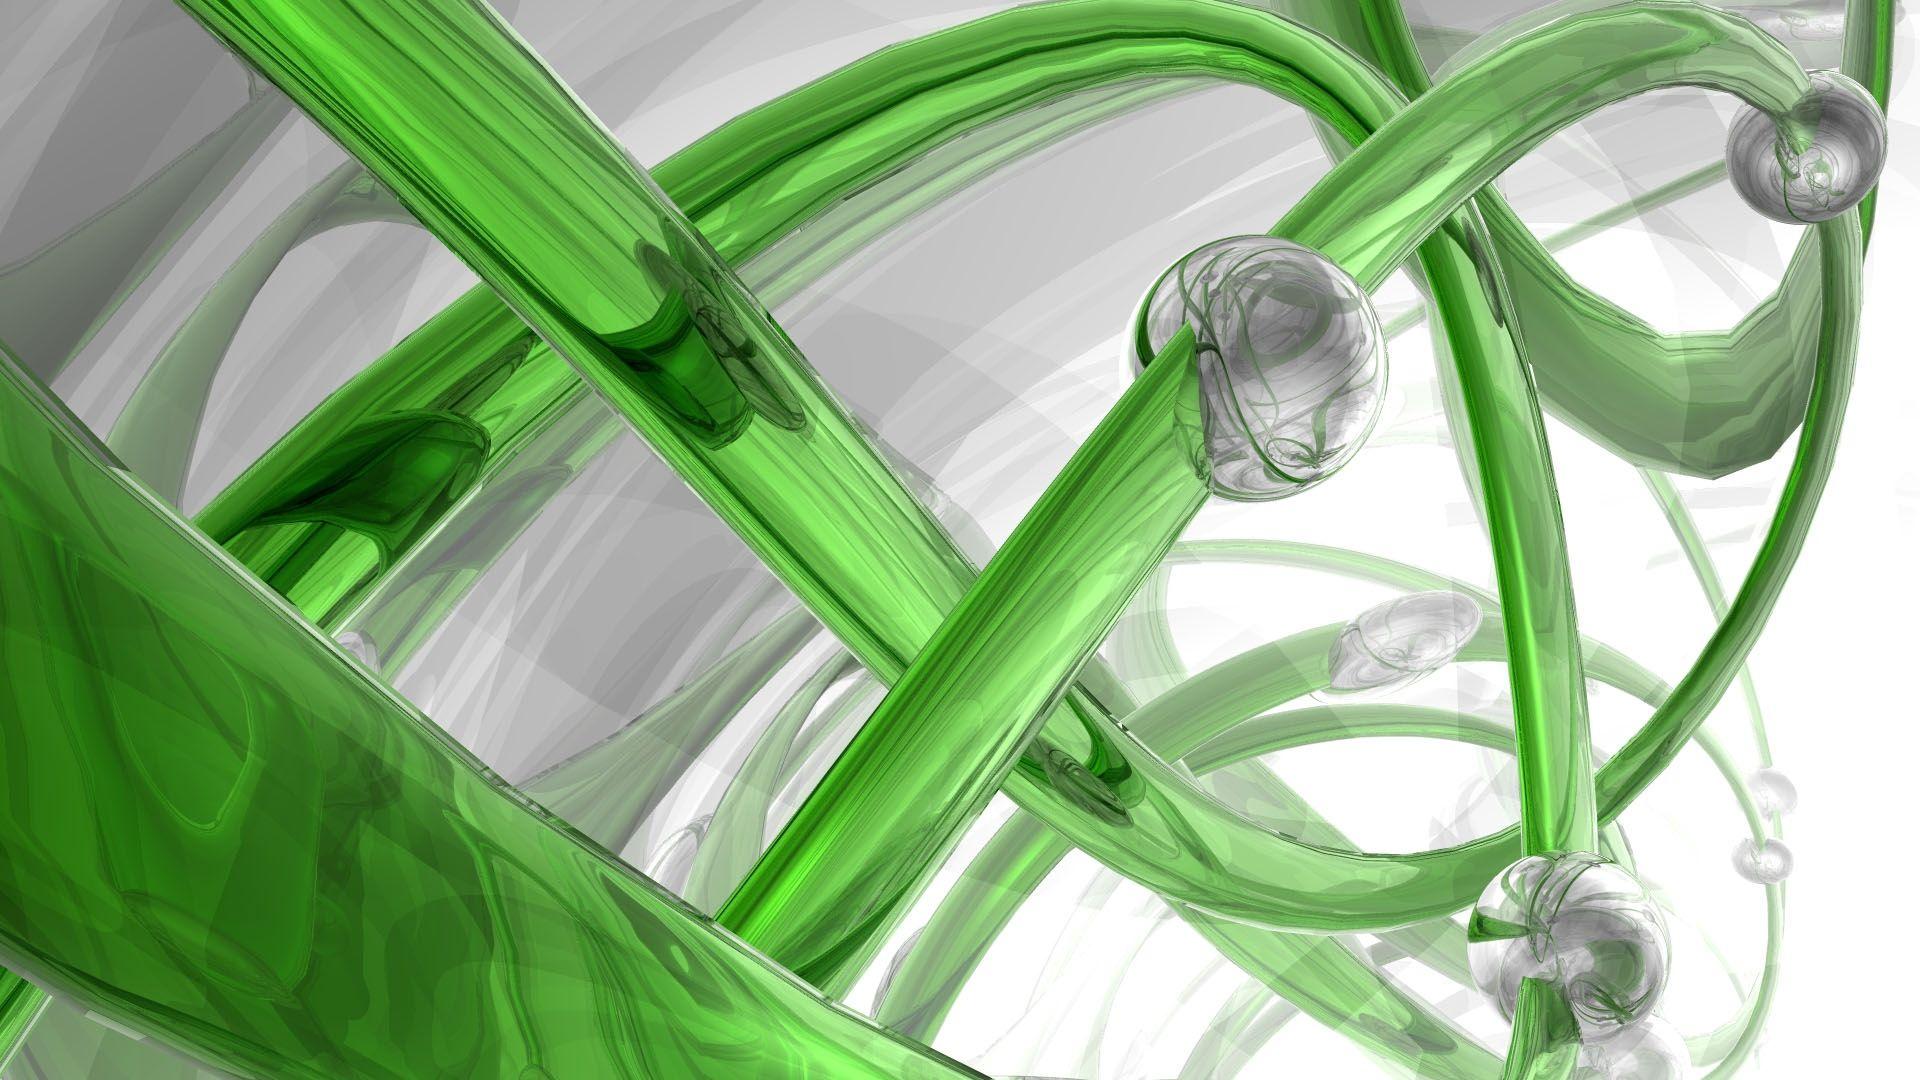 Green and White Spiral Logo - Download wallpaper 1920x1080 3D, spiral, glass, green, white full HD